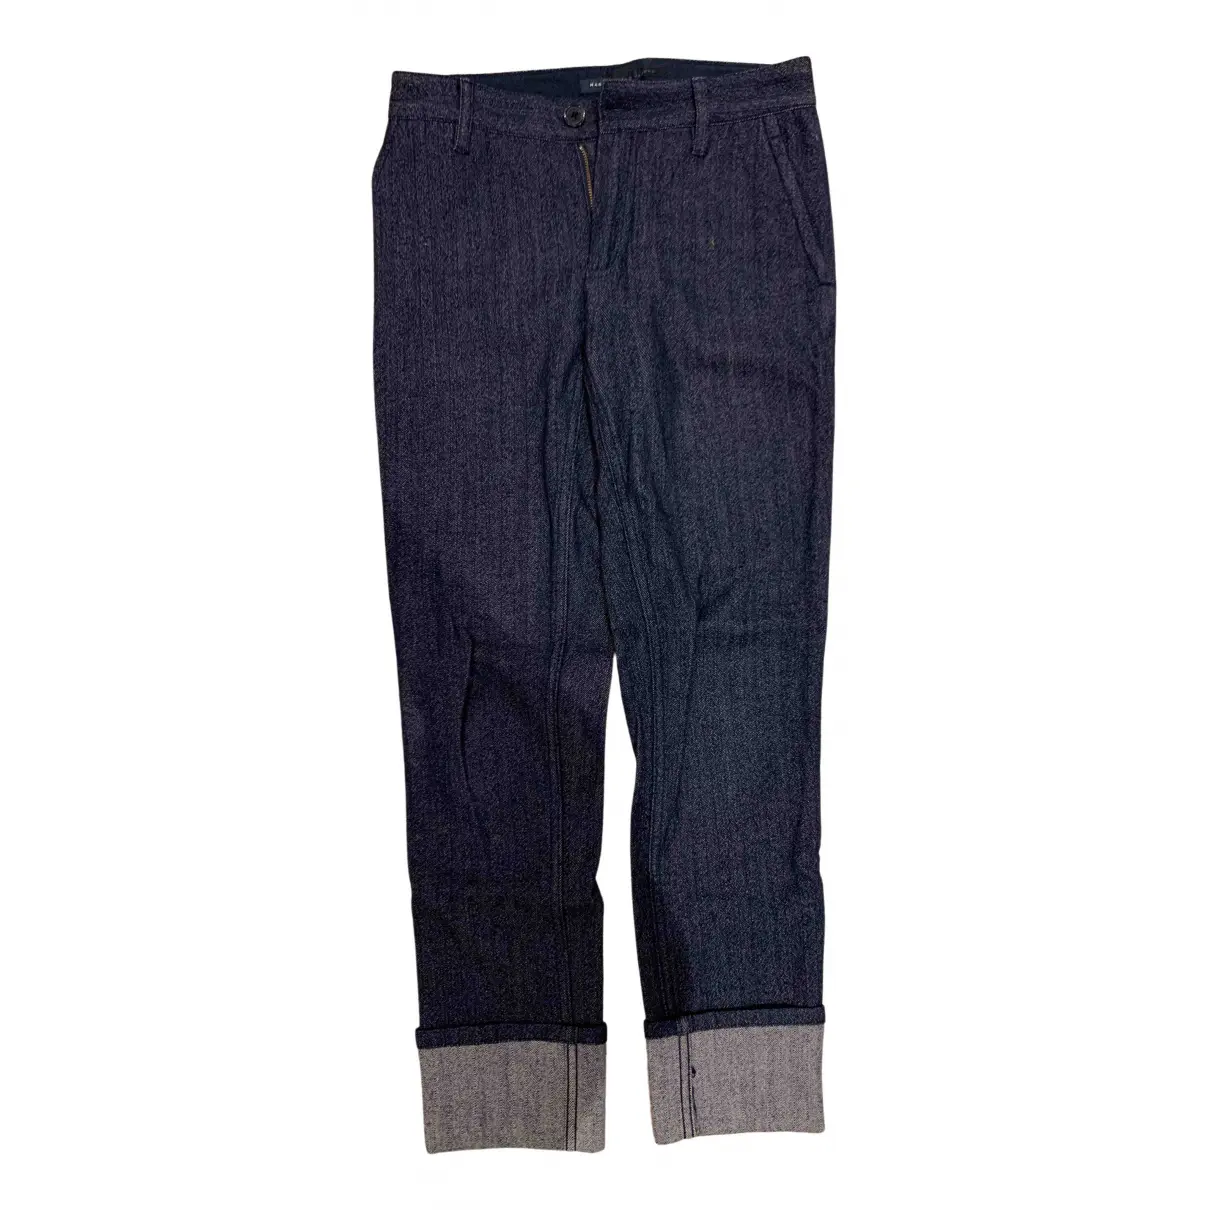 Wool trousers Marc by Marc Jacobs